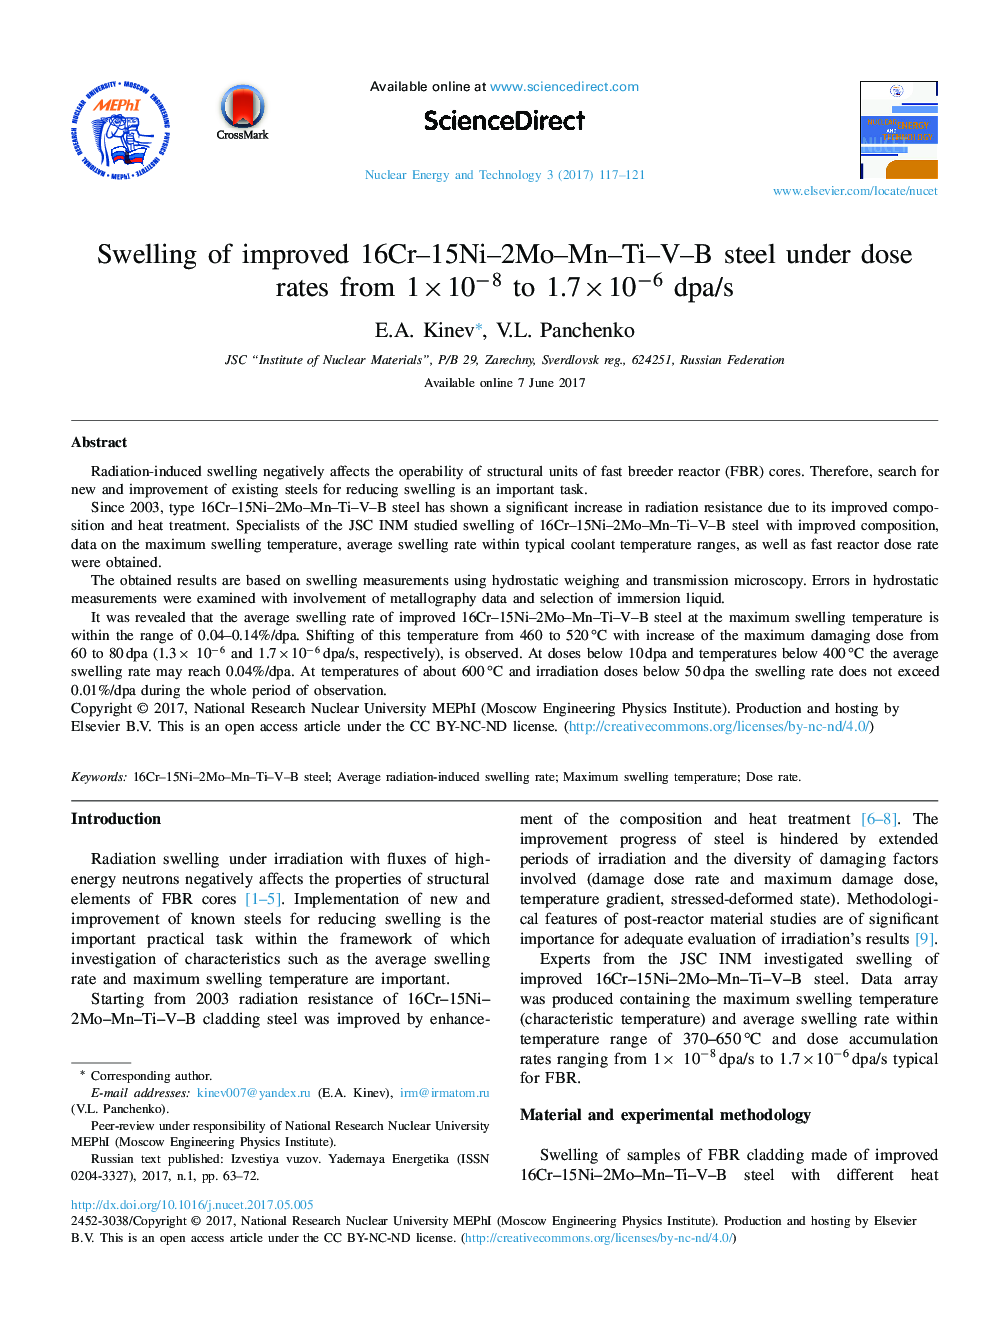 Swelling of improved 16Cr-15Ni-2Mo-Mn-Ti-V-B steel under dose rates from 1Â ÃÂ 10â8 to 1.7Â ÃÂ 10â6 dpa/s